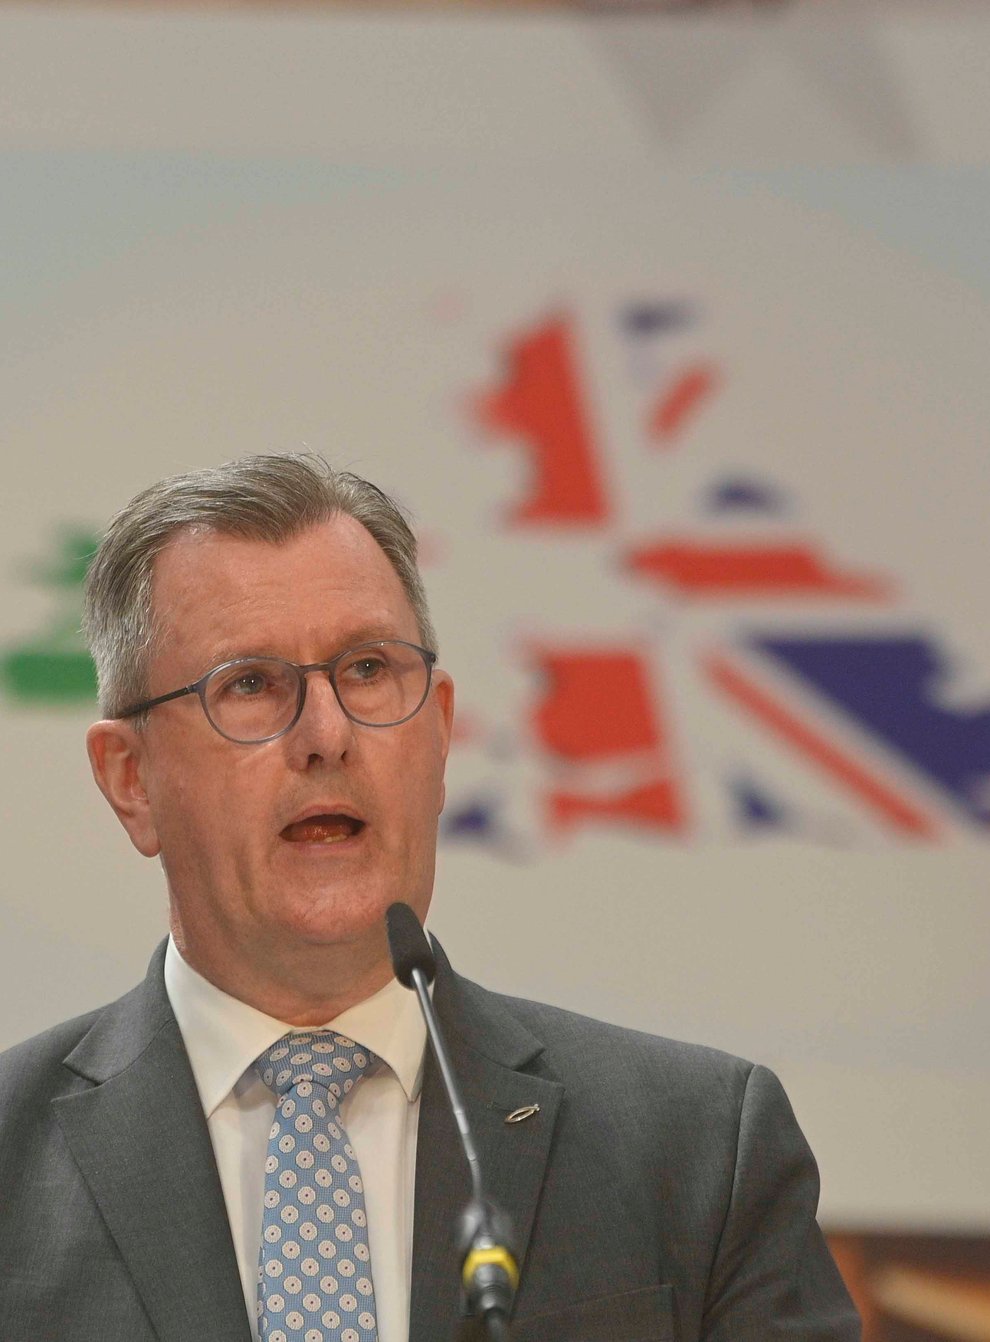 DUP leader Sir Jeffrey Donaldson speaks during the party’s manifesto launch at AJ Power LTD in Craigavon, Co Armagh (Mark Marlow/PA)